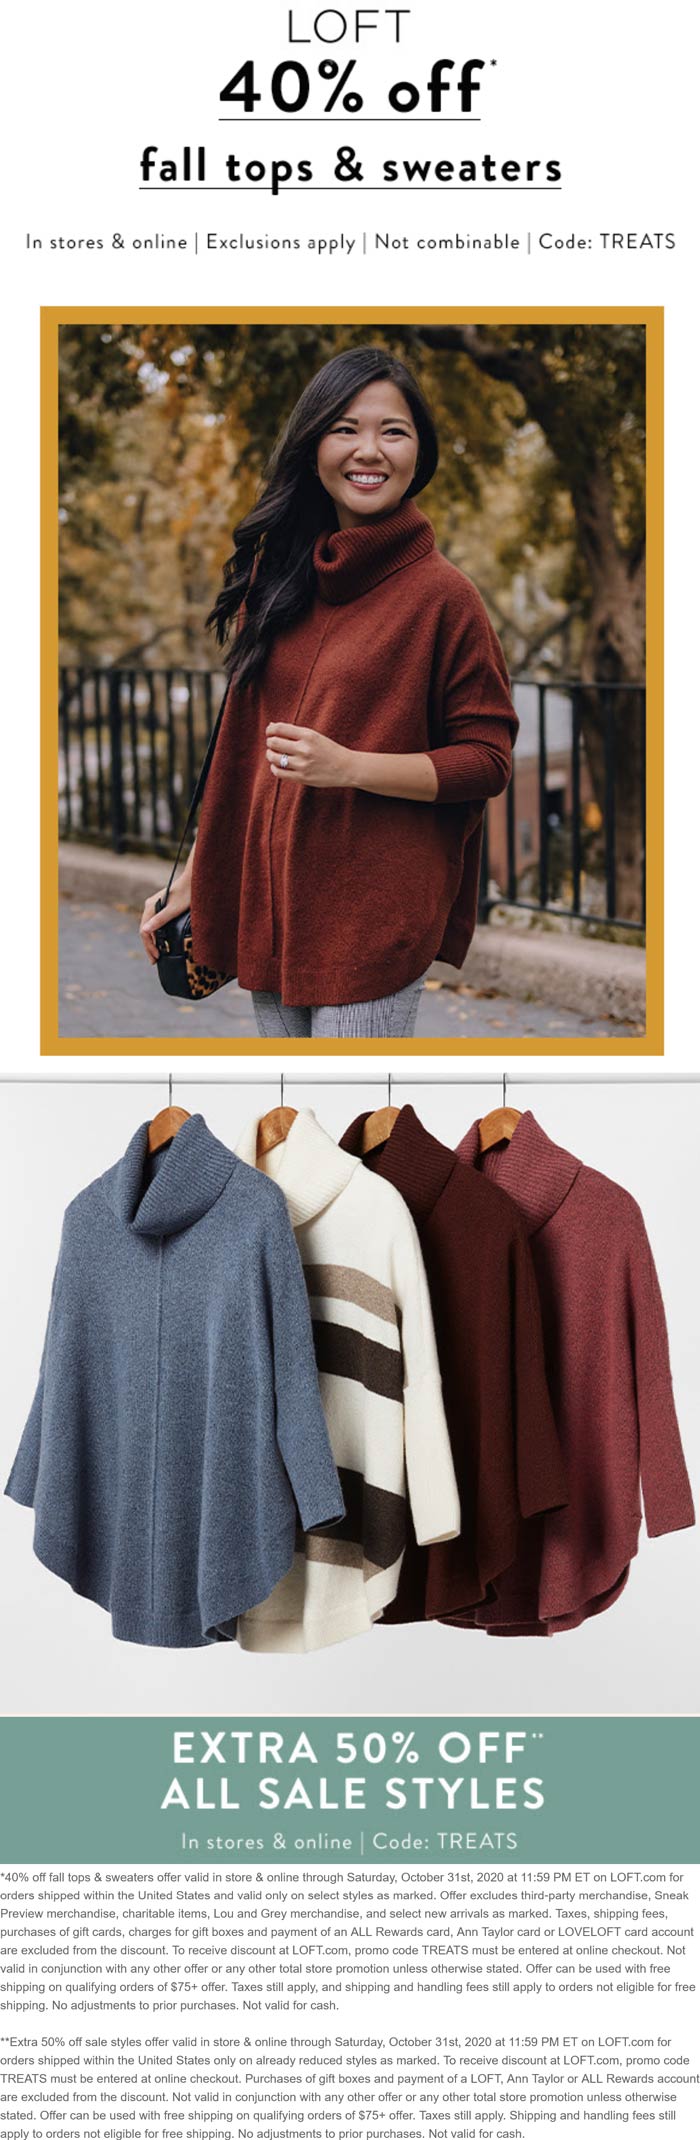 LOFT stores Coupon  40% off Fall tops & sweaters, 50% off all sale styles at LOFT, or online via promo code TREATS #loft 